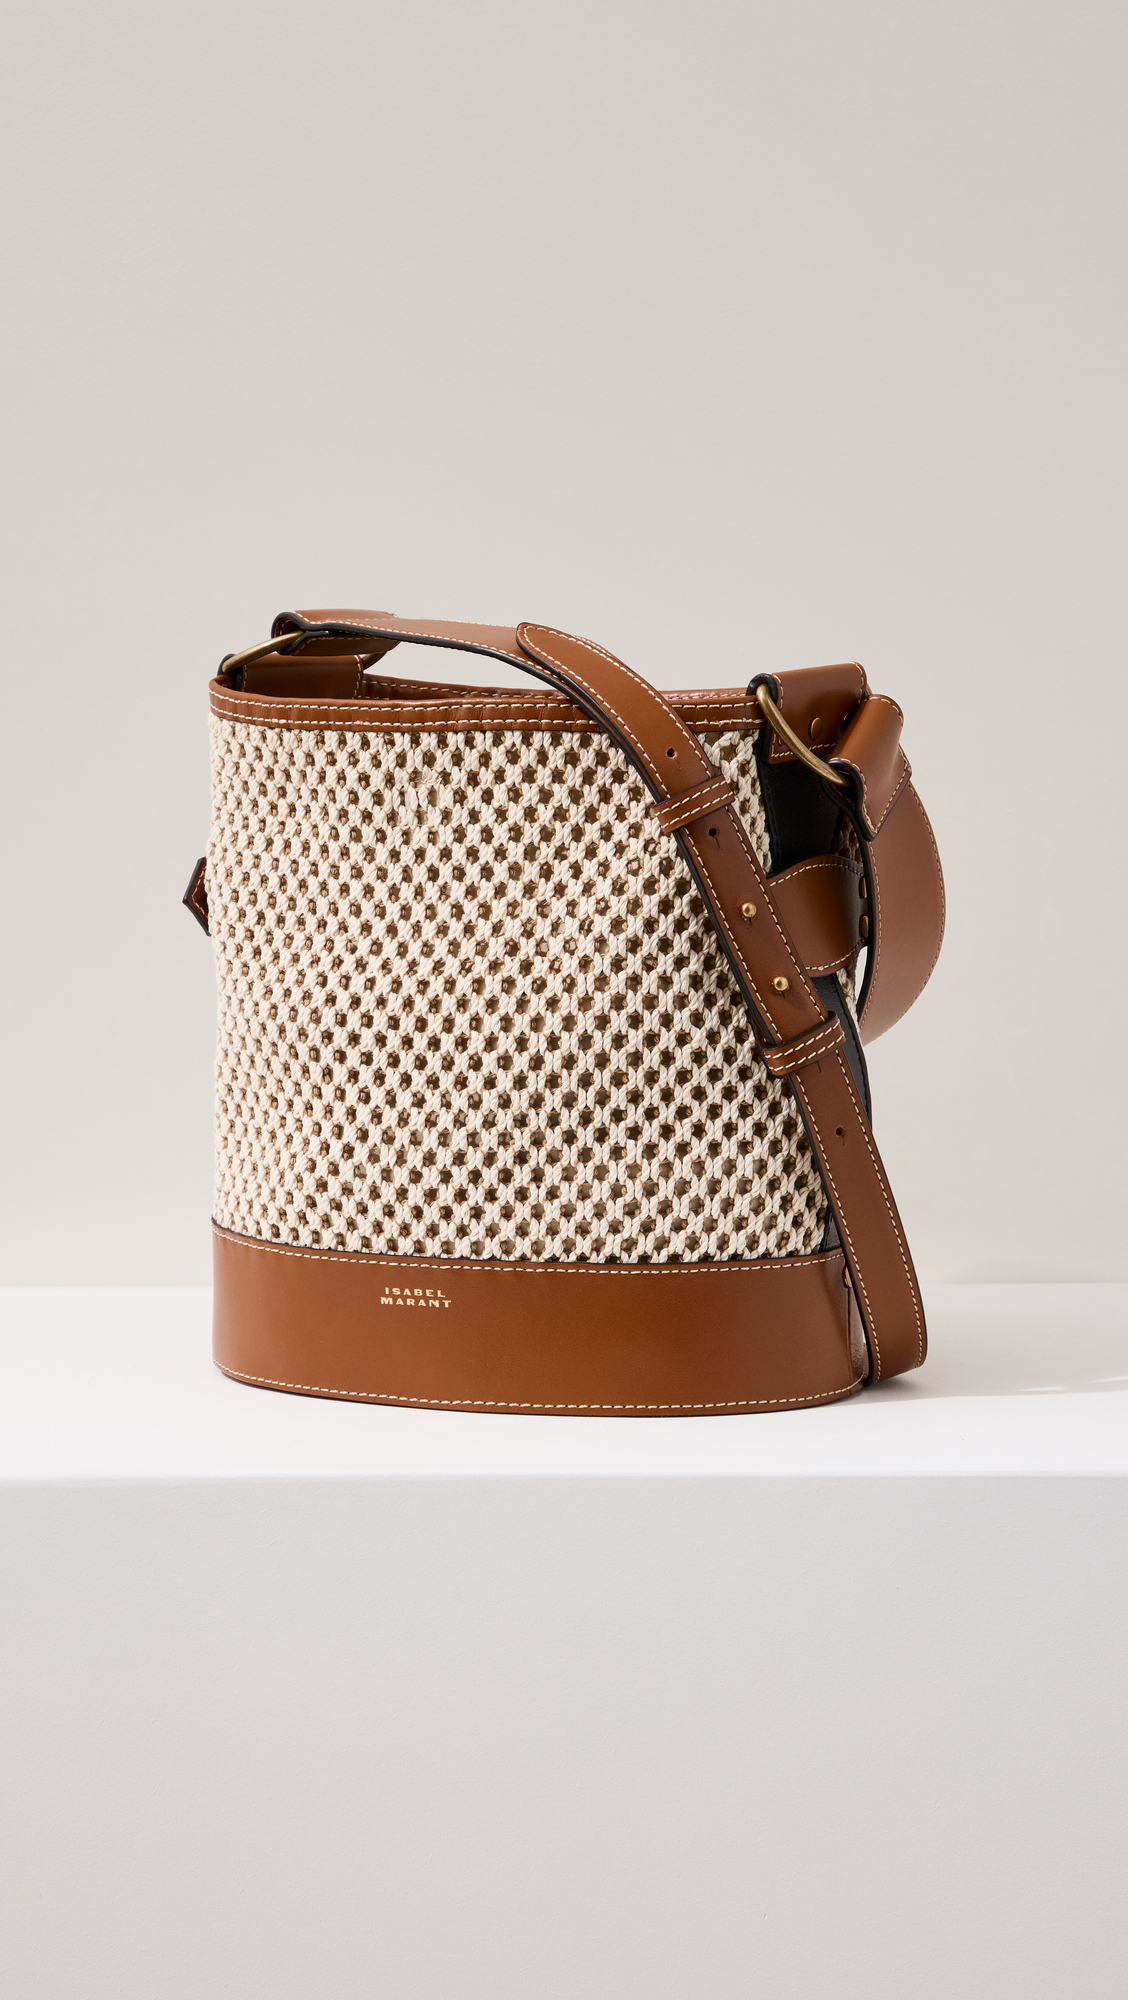 Strathberry - Lana Osette - Leather Mini Bucket Bag - Natural / Brown